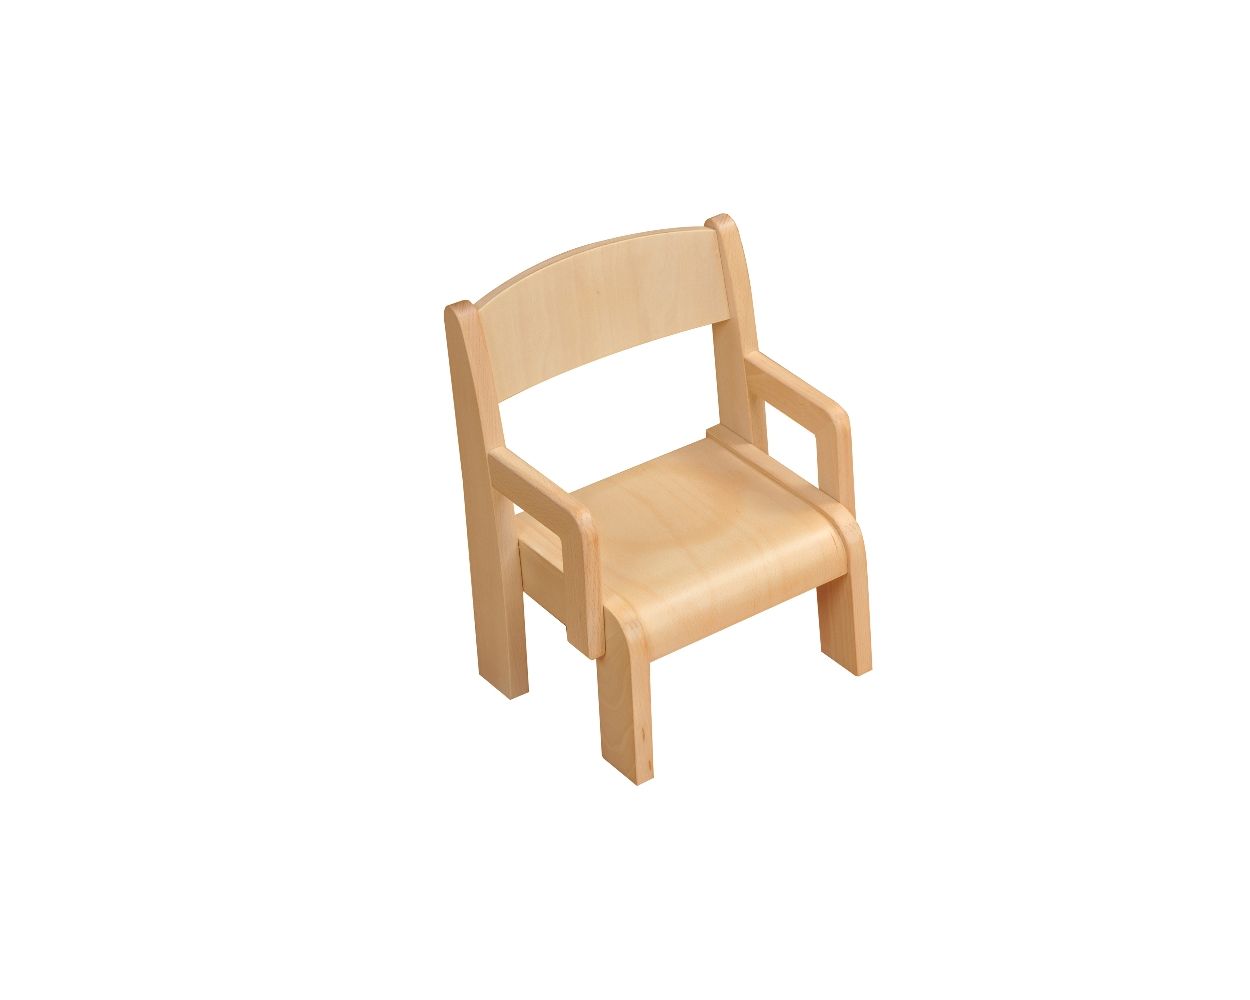 Toddler Wooden Classroom Chair, Toddler Wooden Chair With Arms